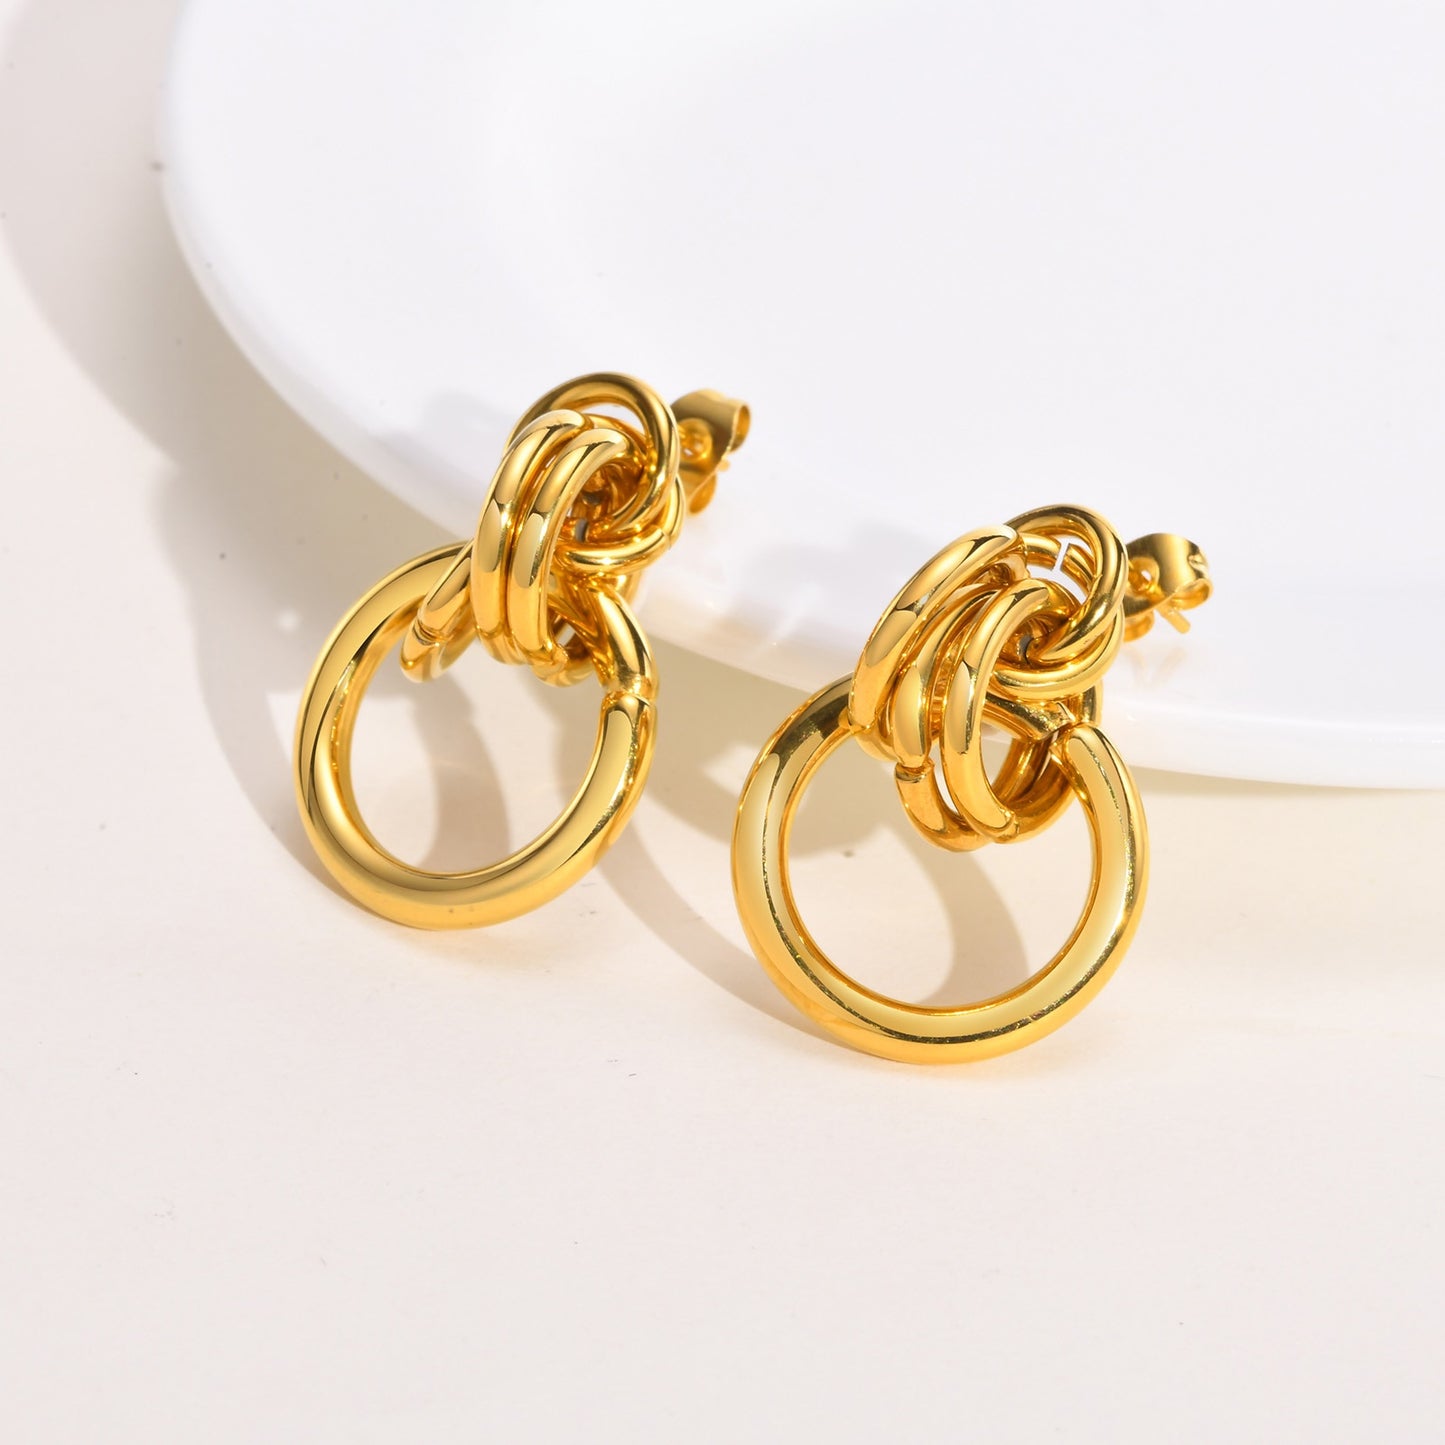 Aretes para mujeres Gold Color Geometric Oval Hoop Earrings for Women, Simple Stainless Steel Metal Style Female Ear Gifts Accessory